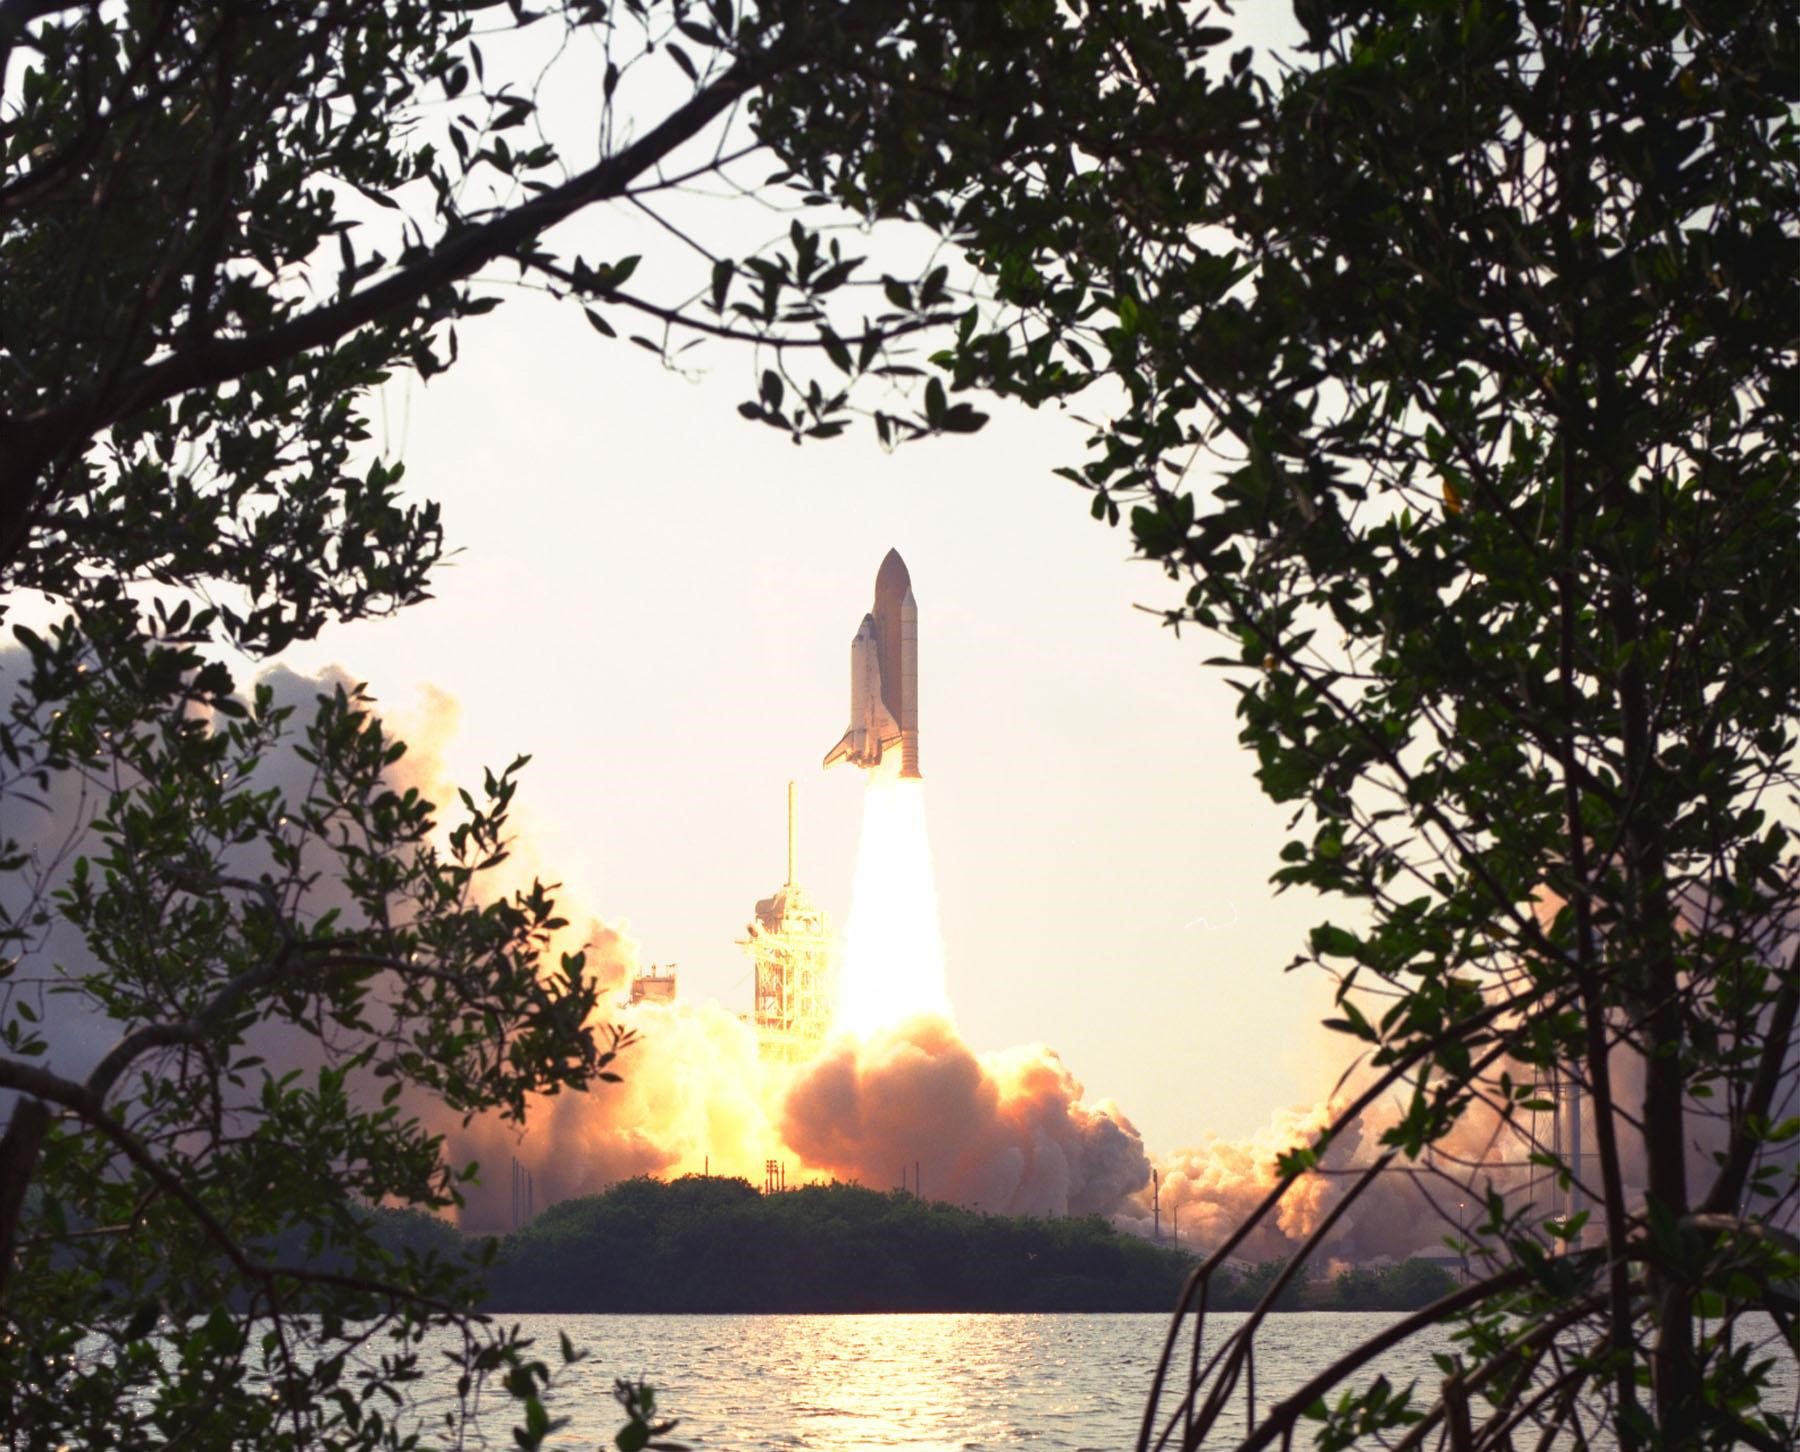 This week in 1998, space shuttle Discovery, mission STS-91, launched from NASA’s Kennedy Space Center.